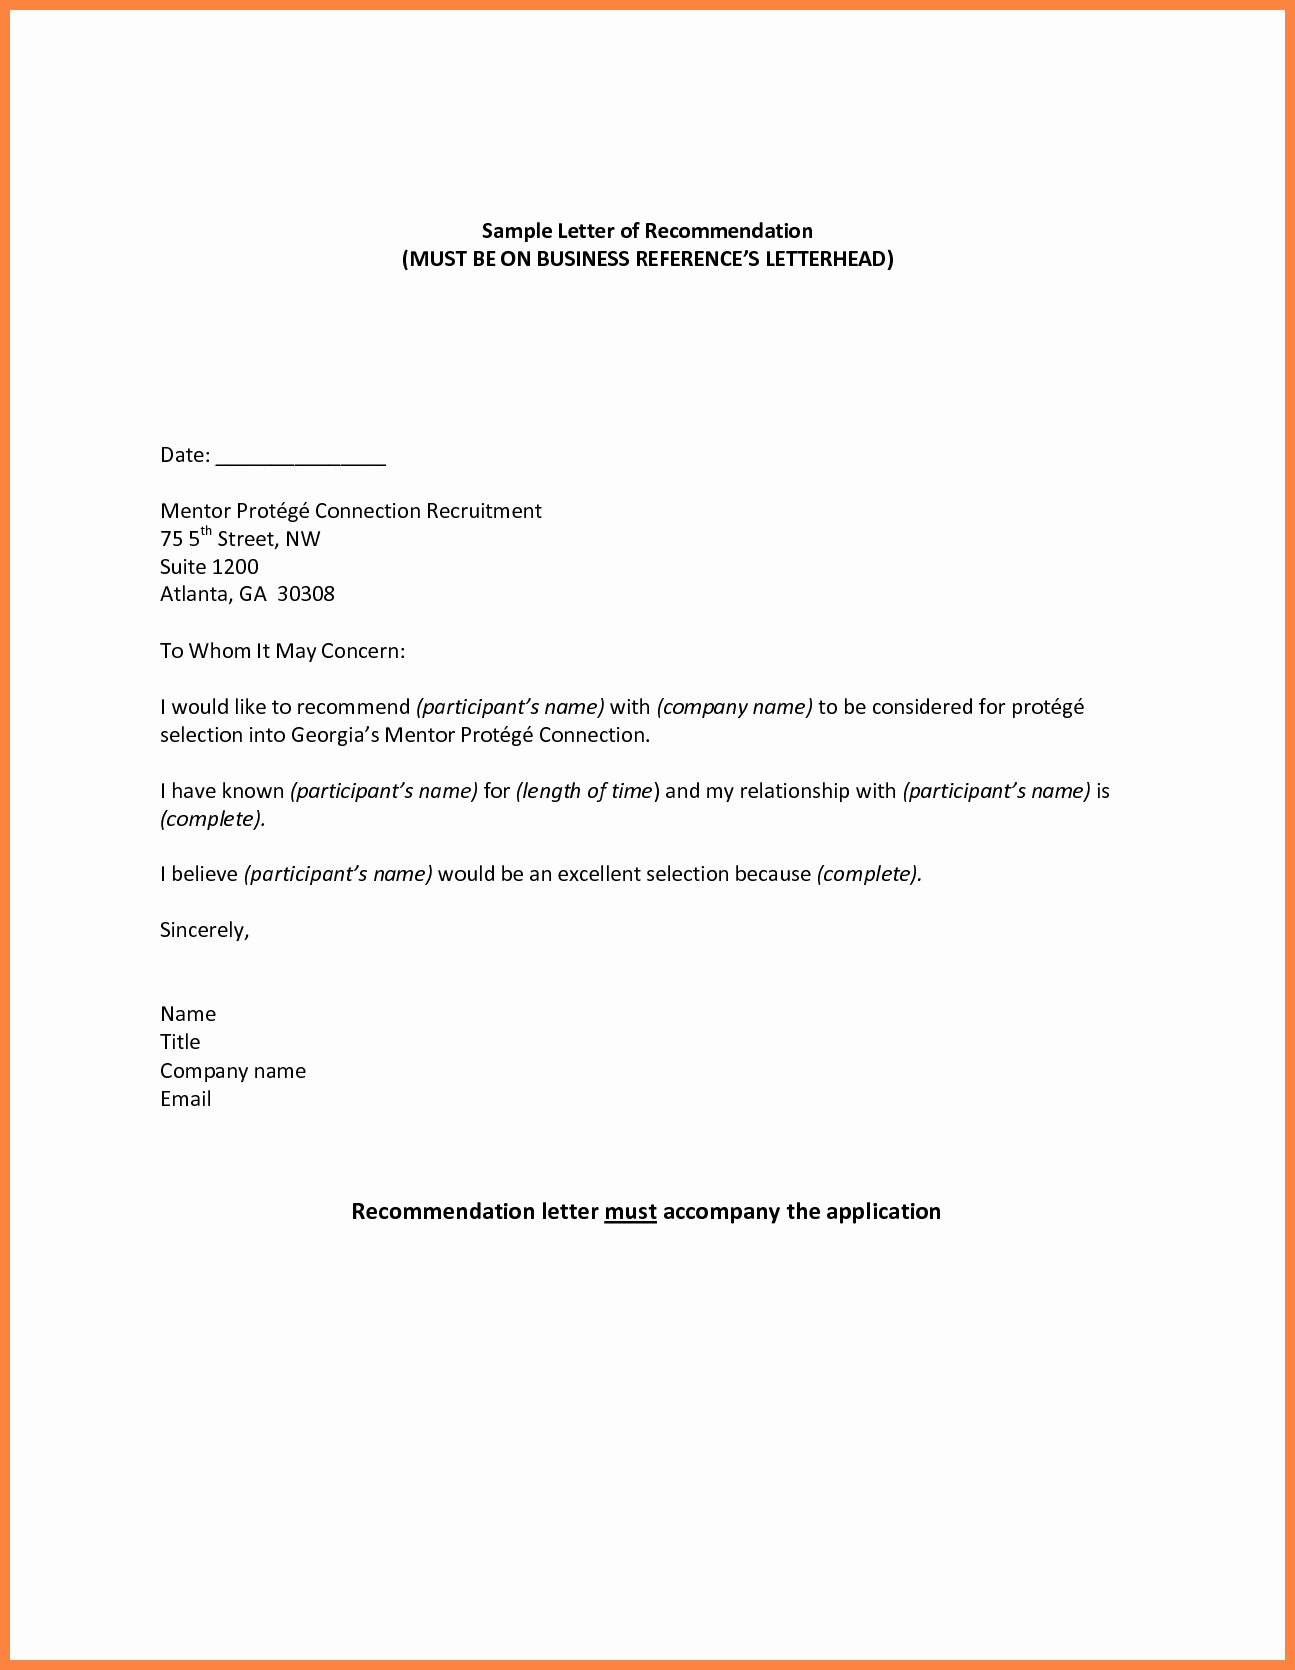 Business Recommendation Letter Sample Inspirational 7 Re Mendation Letter for A Pany Sample